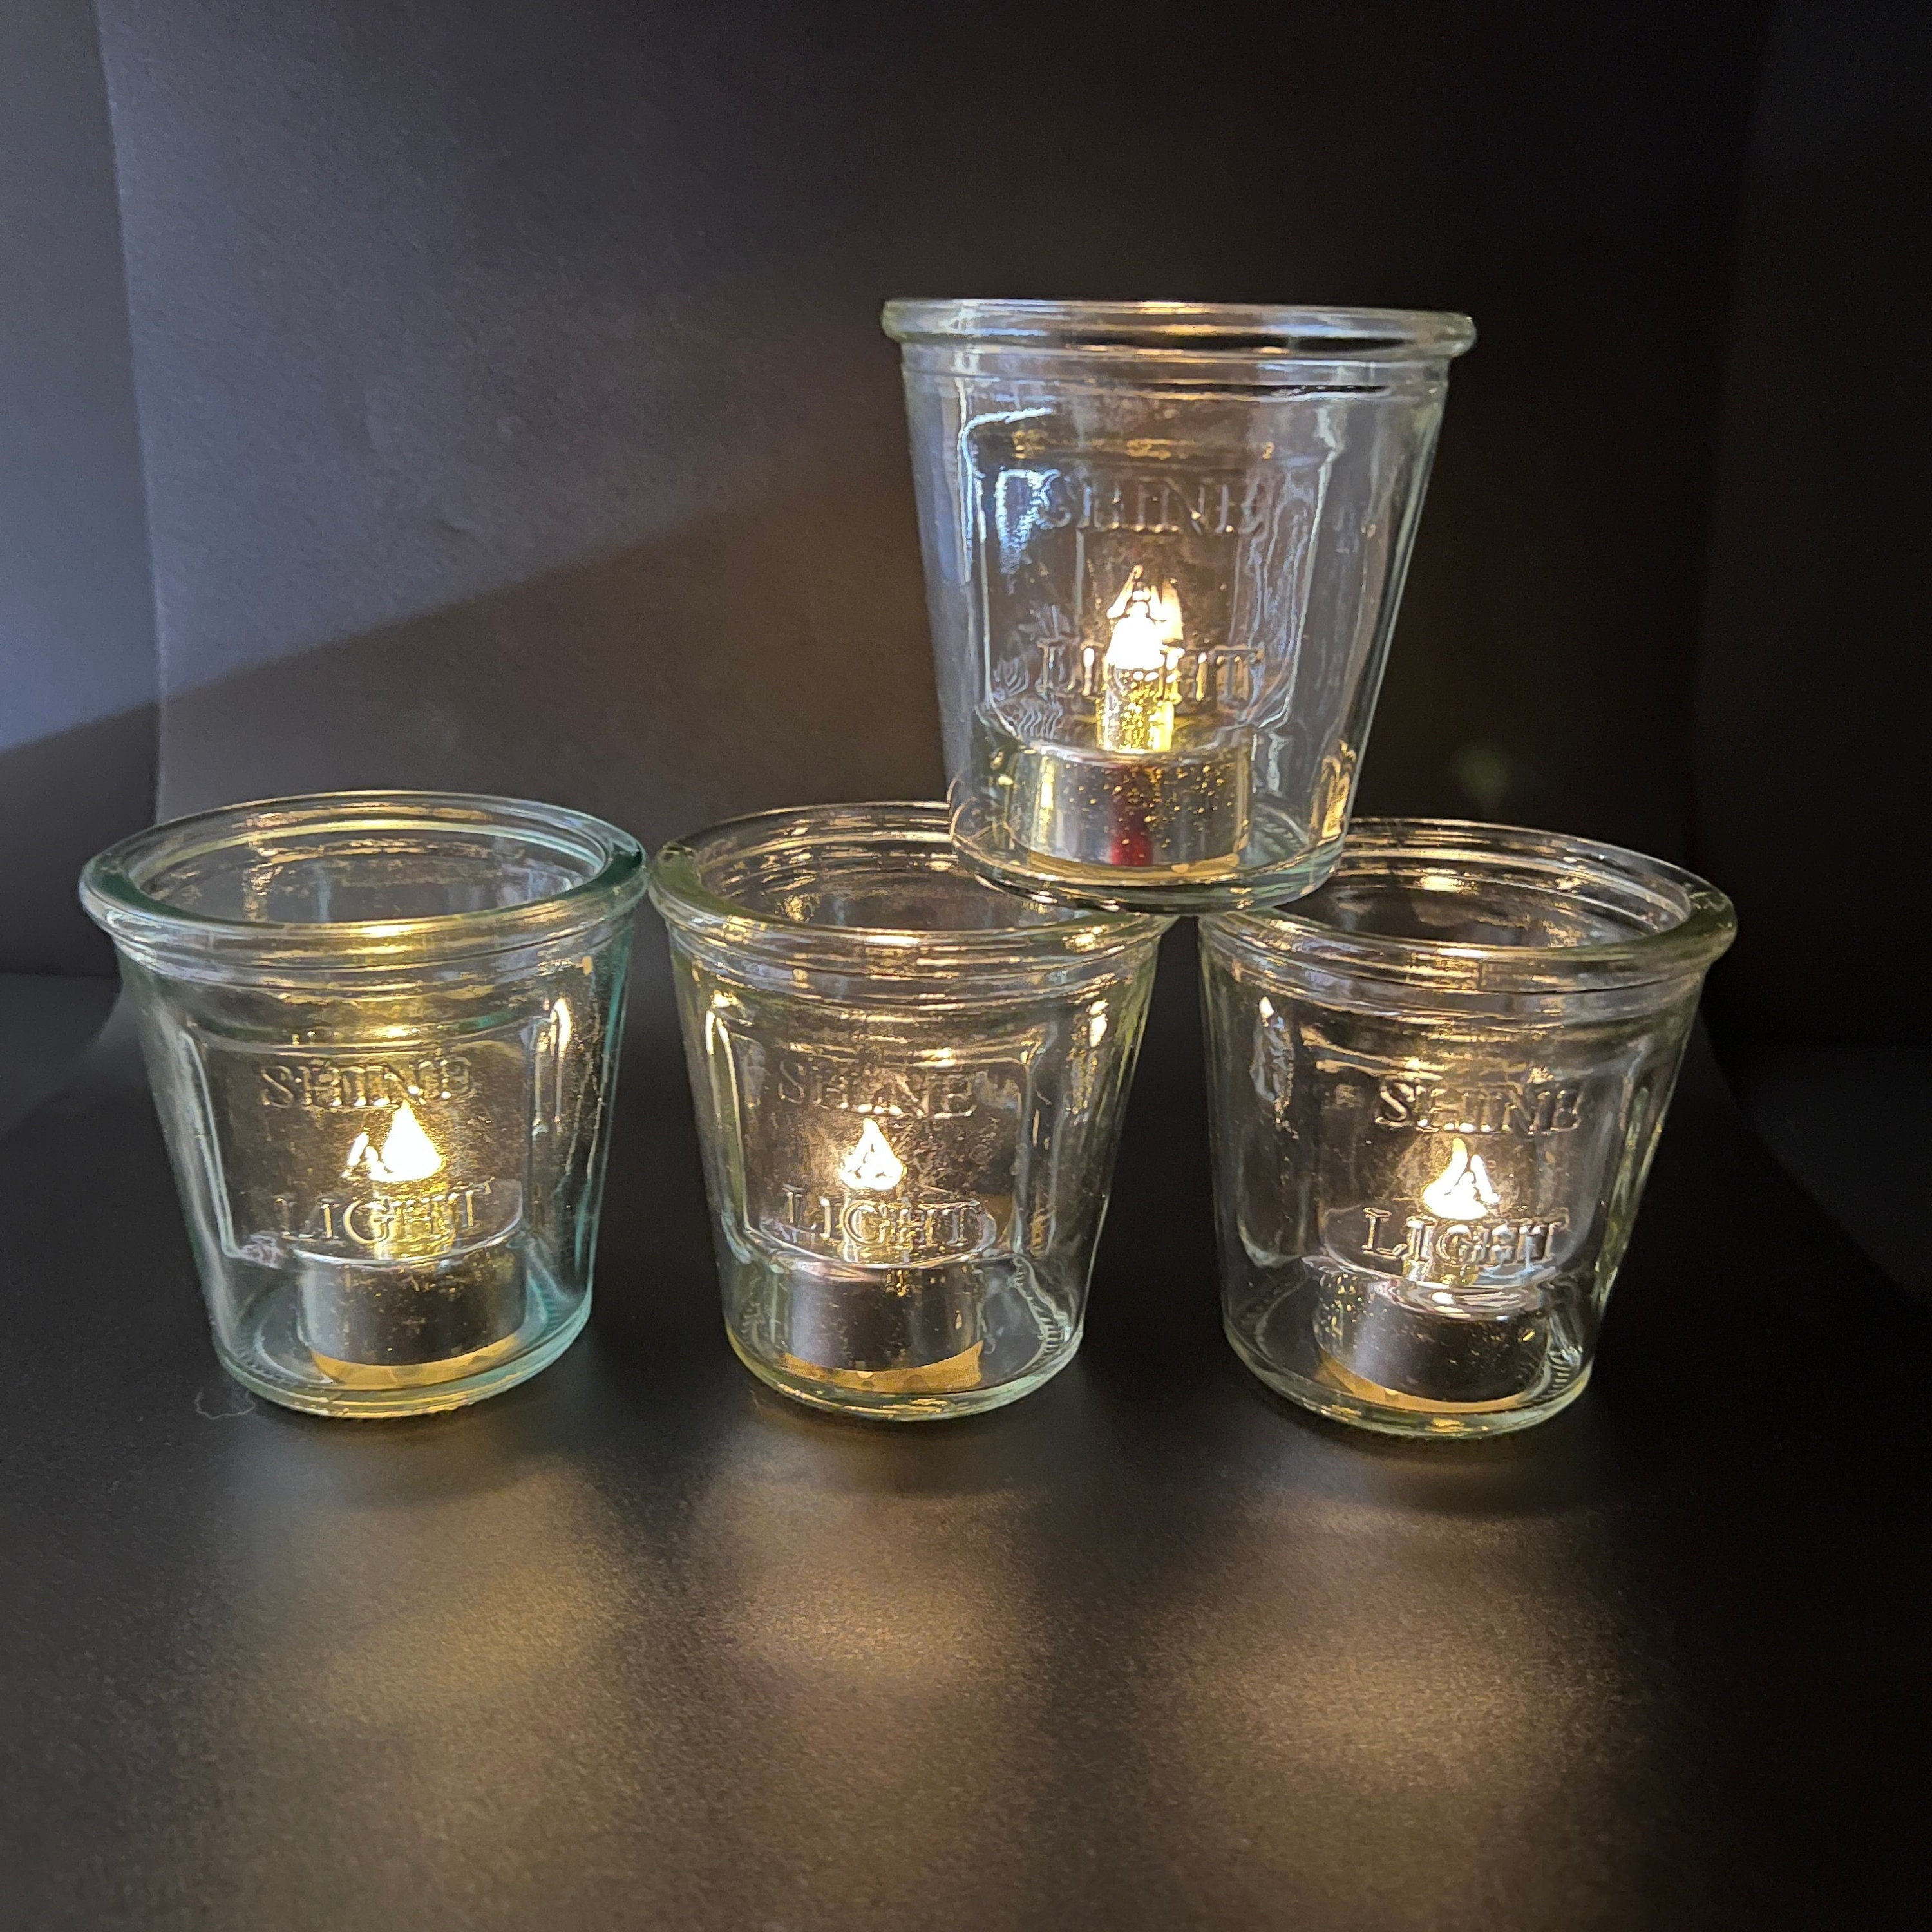 Bulk 15OZ glass candle jars with lids embossed honeycomb pattern  design,candle holders wholesale